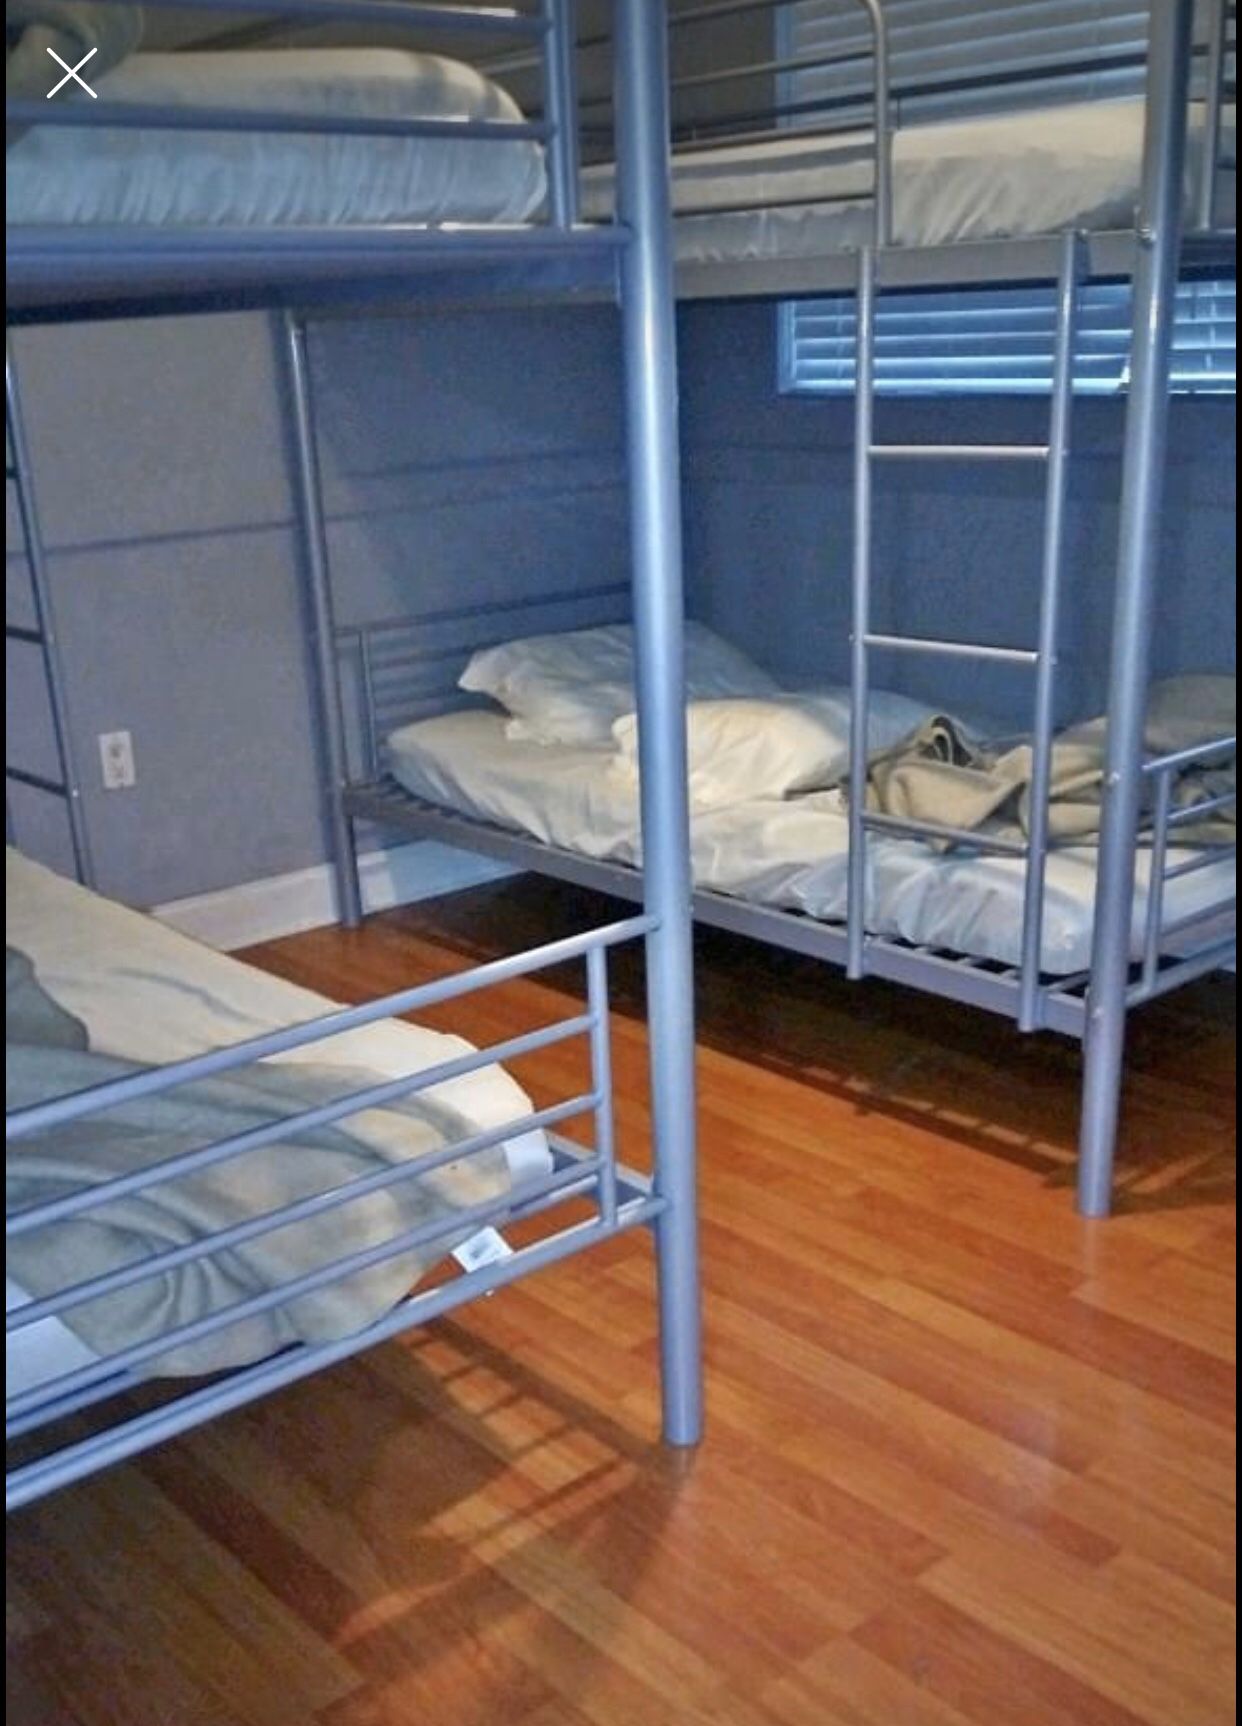 Bunk beds 2 for 500